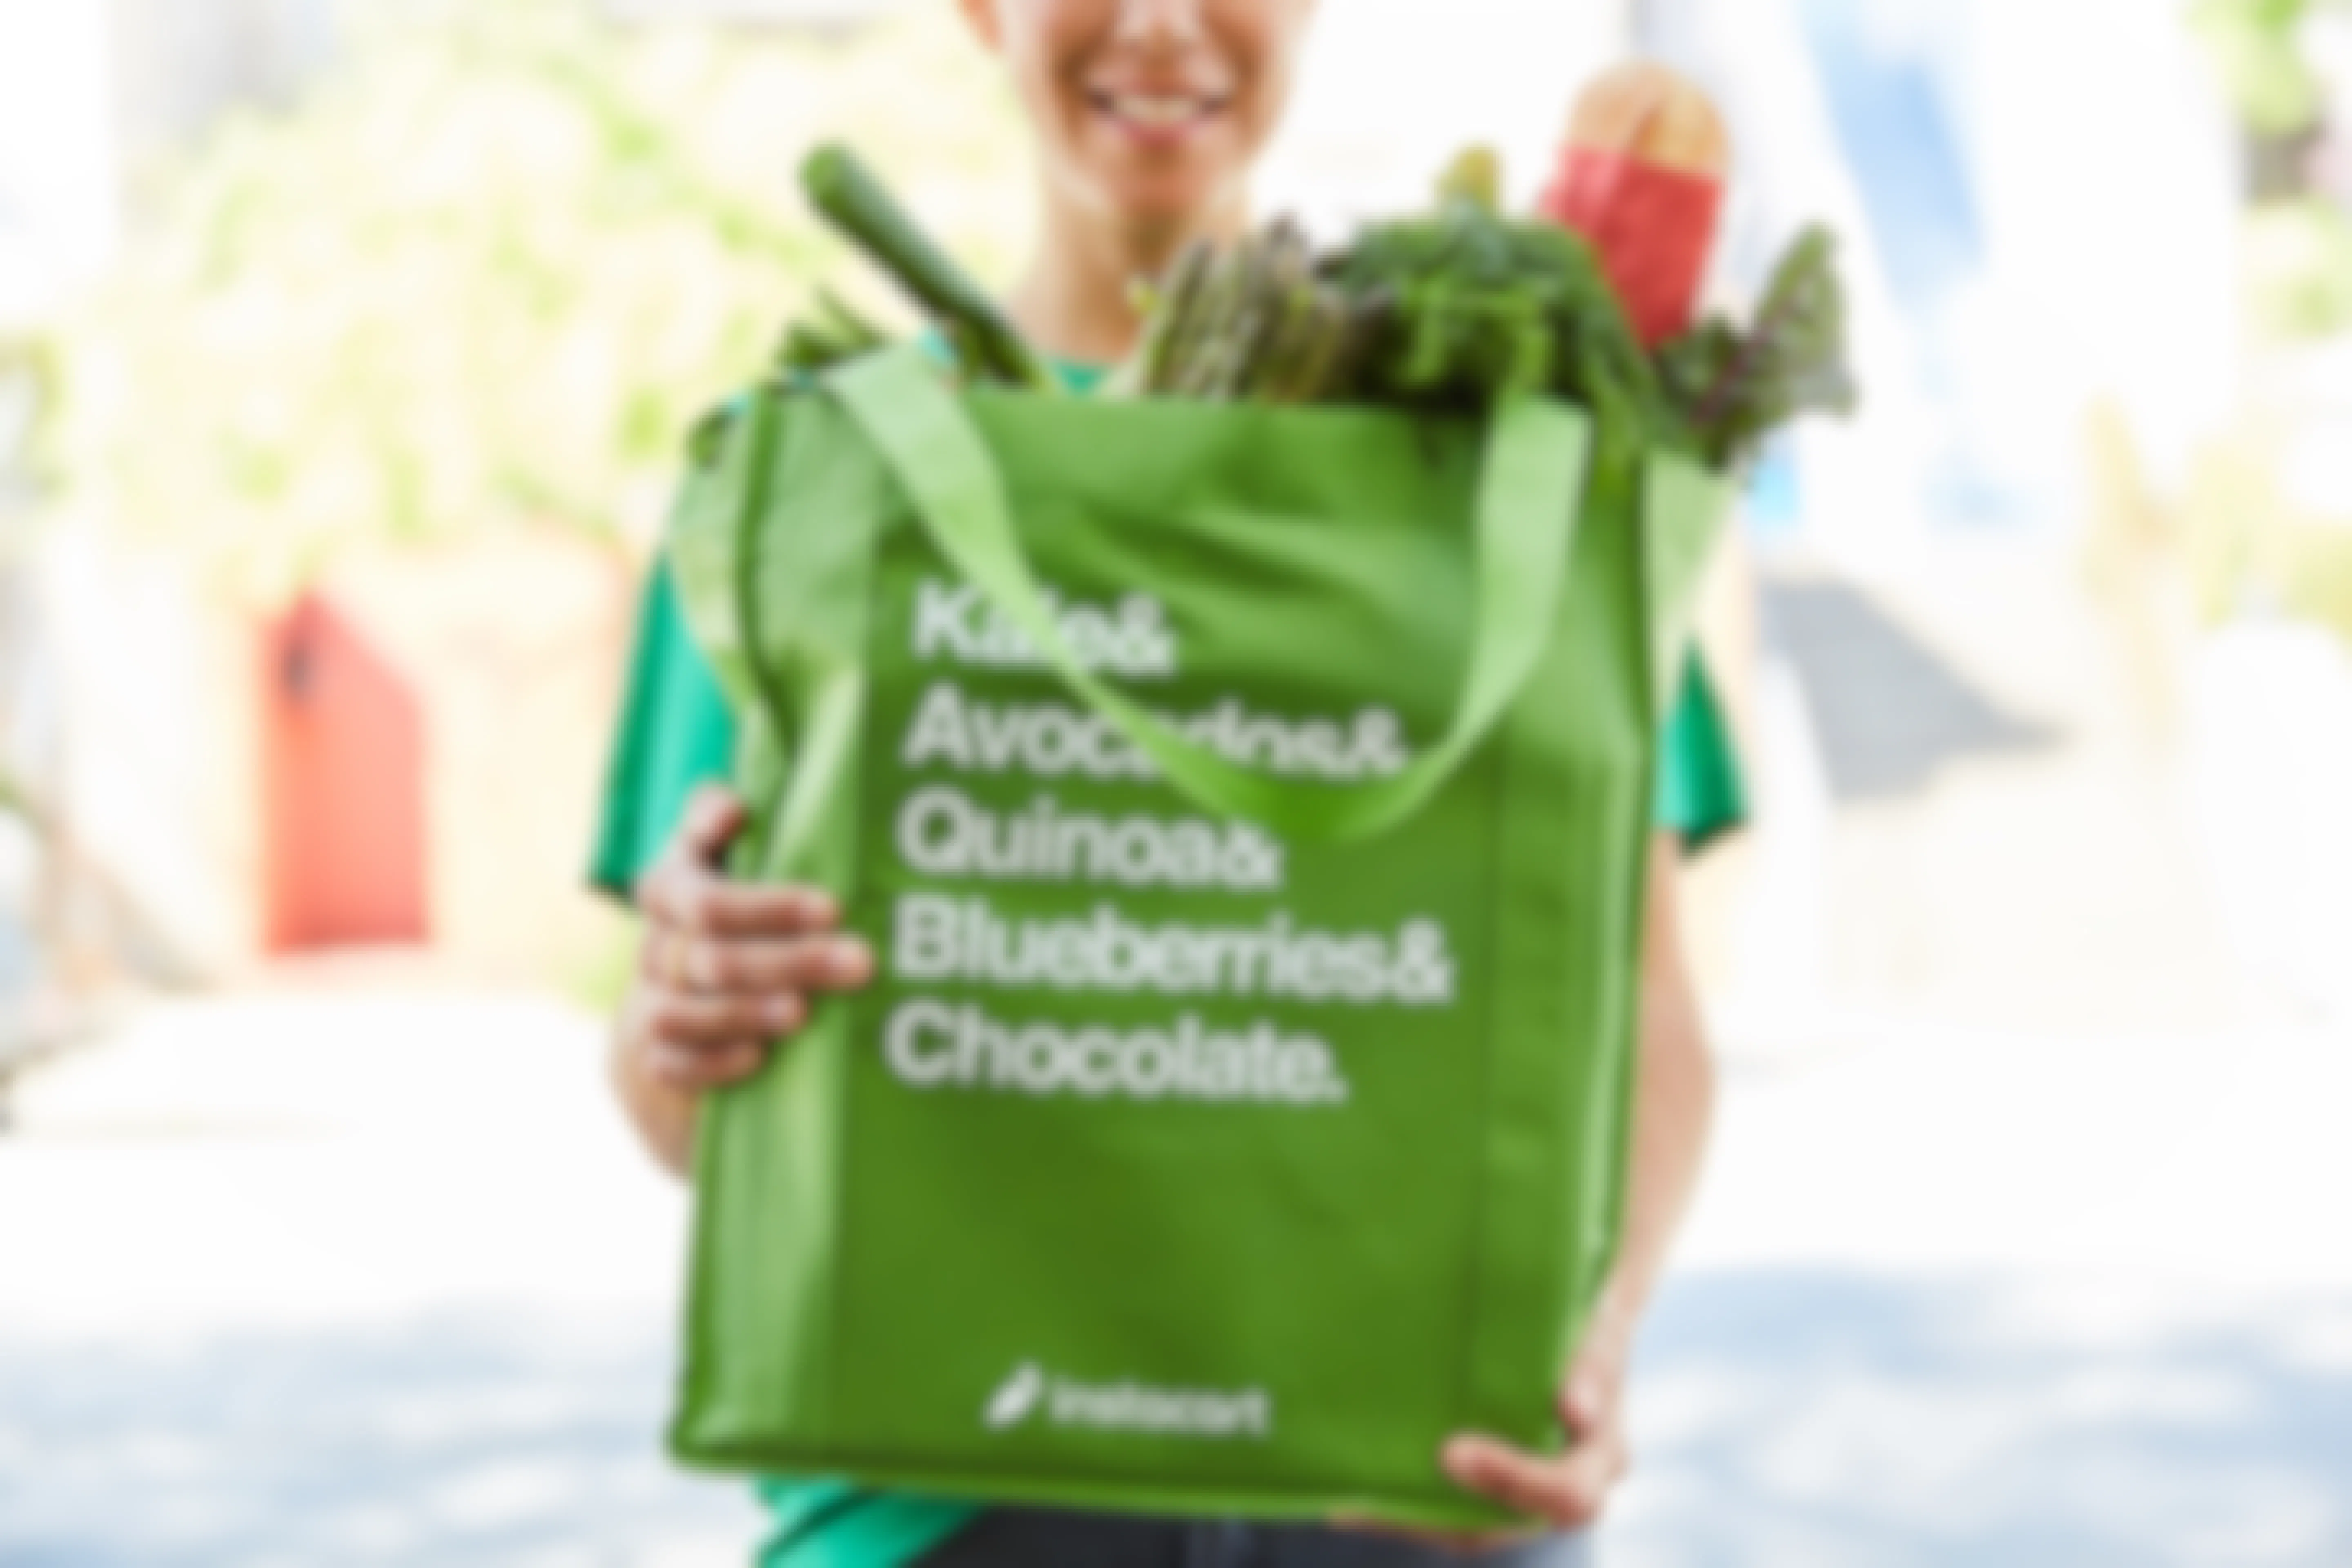 Instacart delivery person holding instacart shopping bag